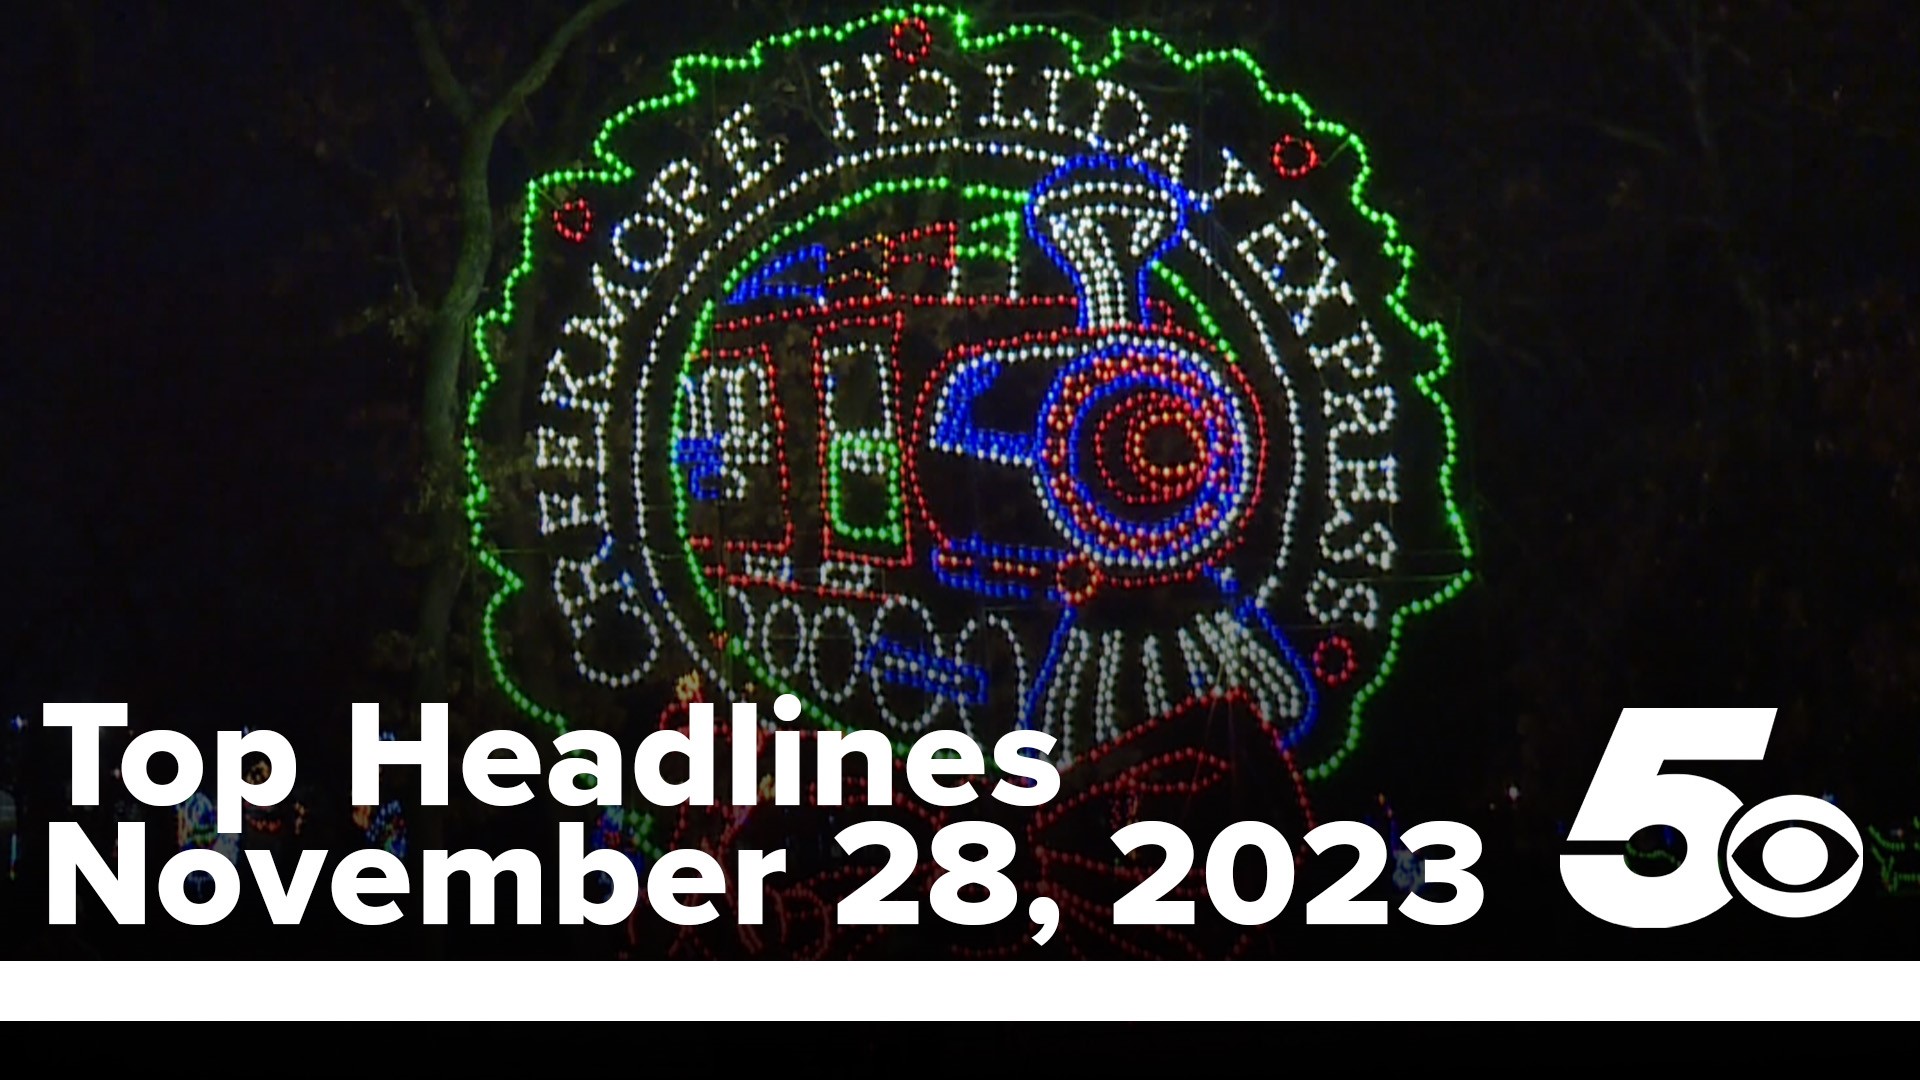 The holiday season is in full swing. Watch your 5NEWS Top Headlines to find out what's new.